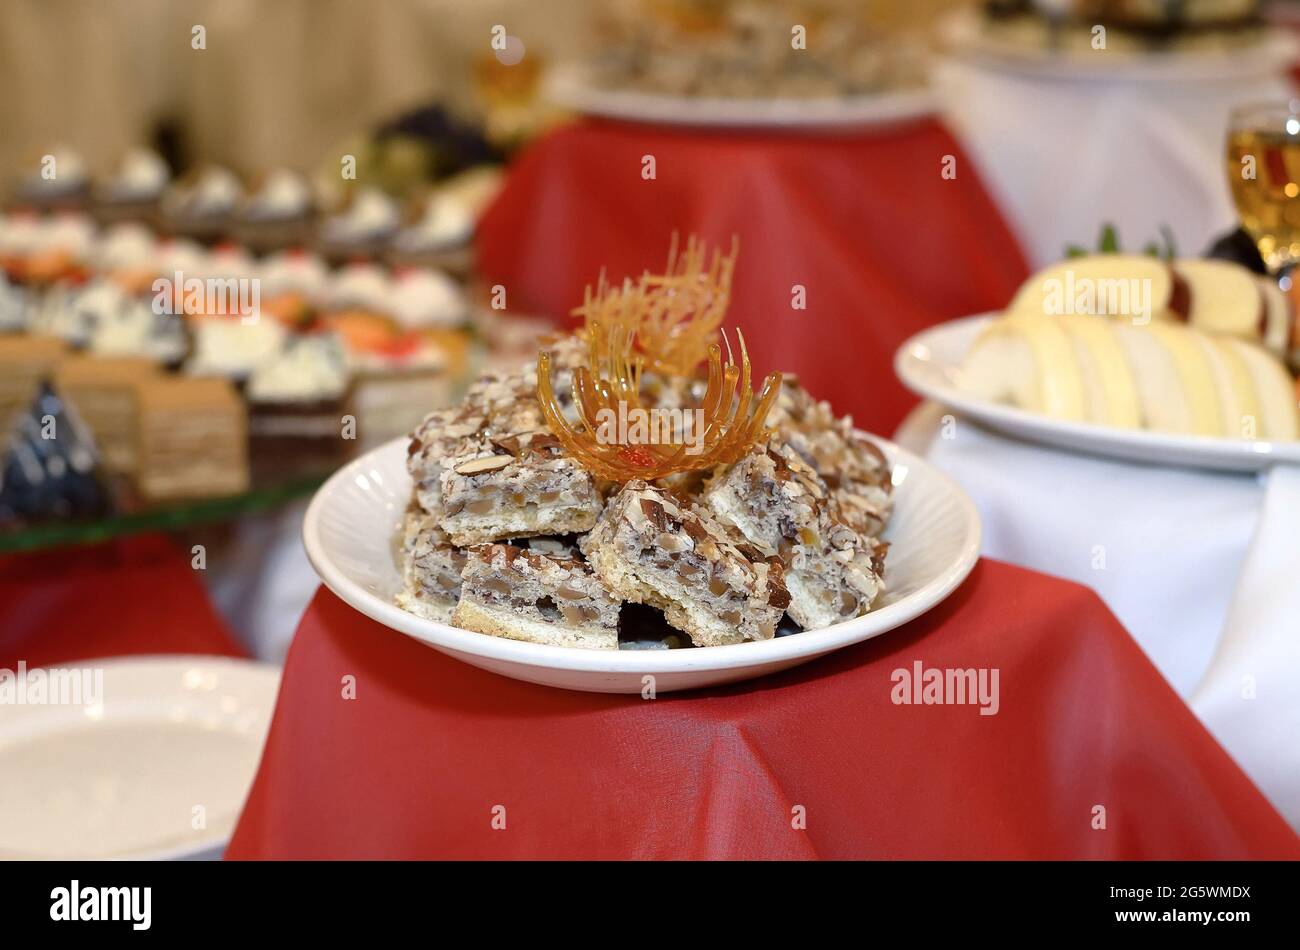 Catering a plate on a red tablecloth with small cakes made of different nuts and peanuts decorated with caramel Stock Photo